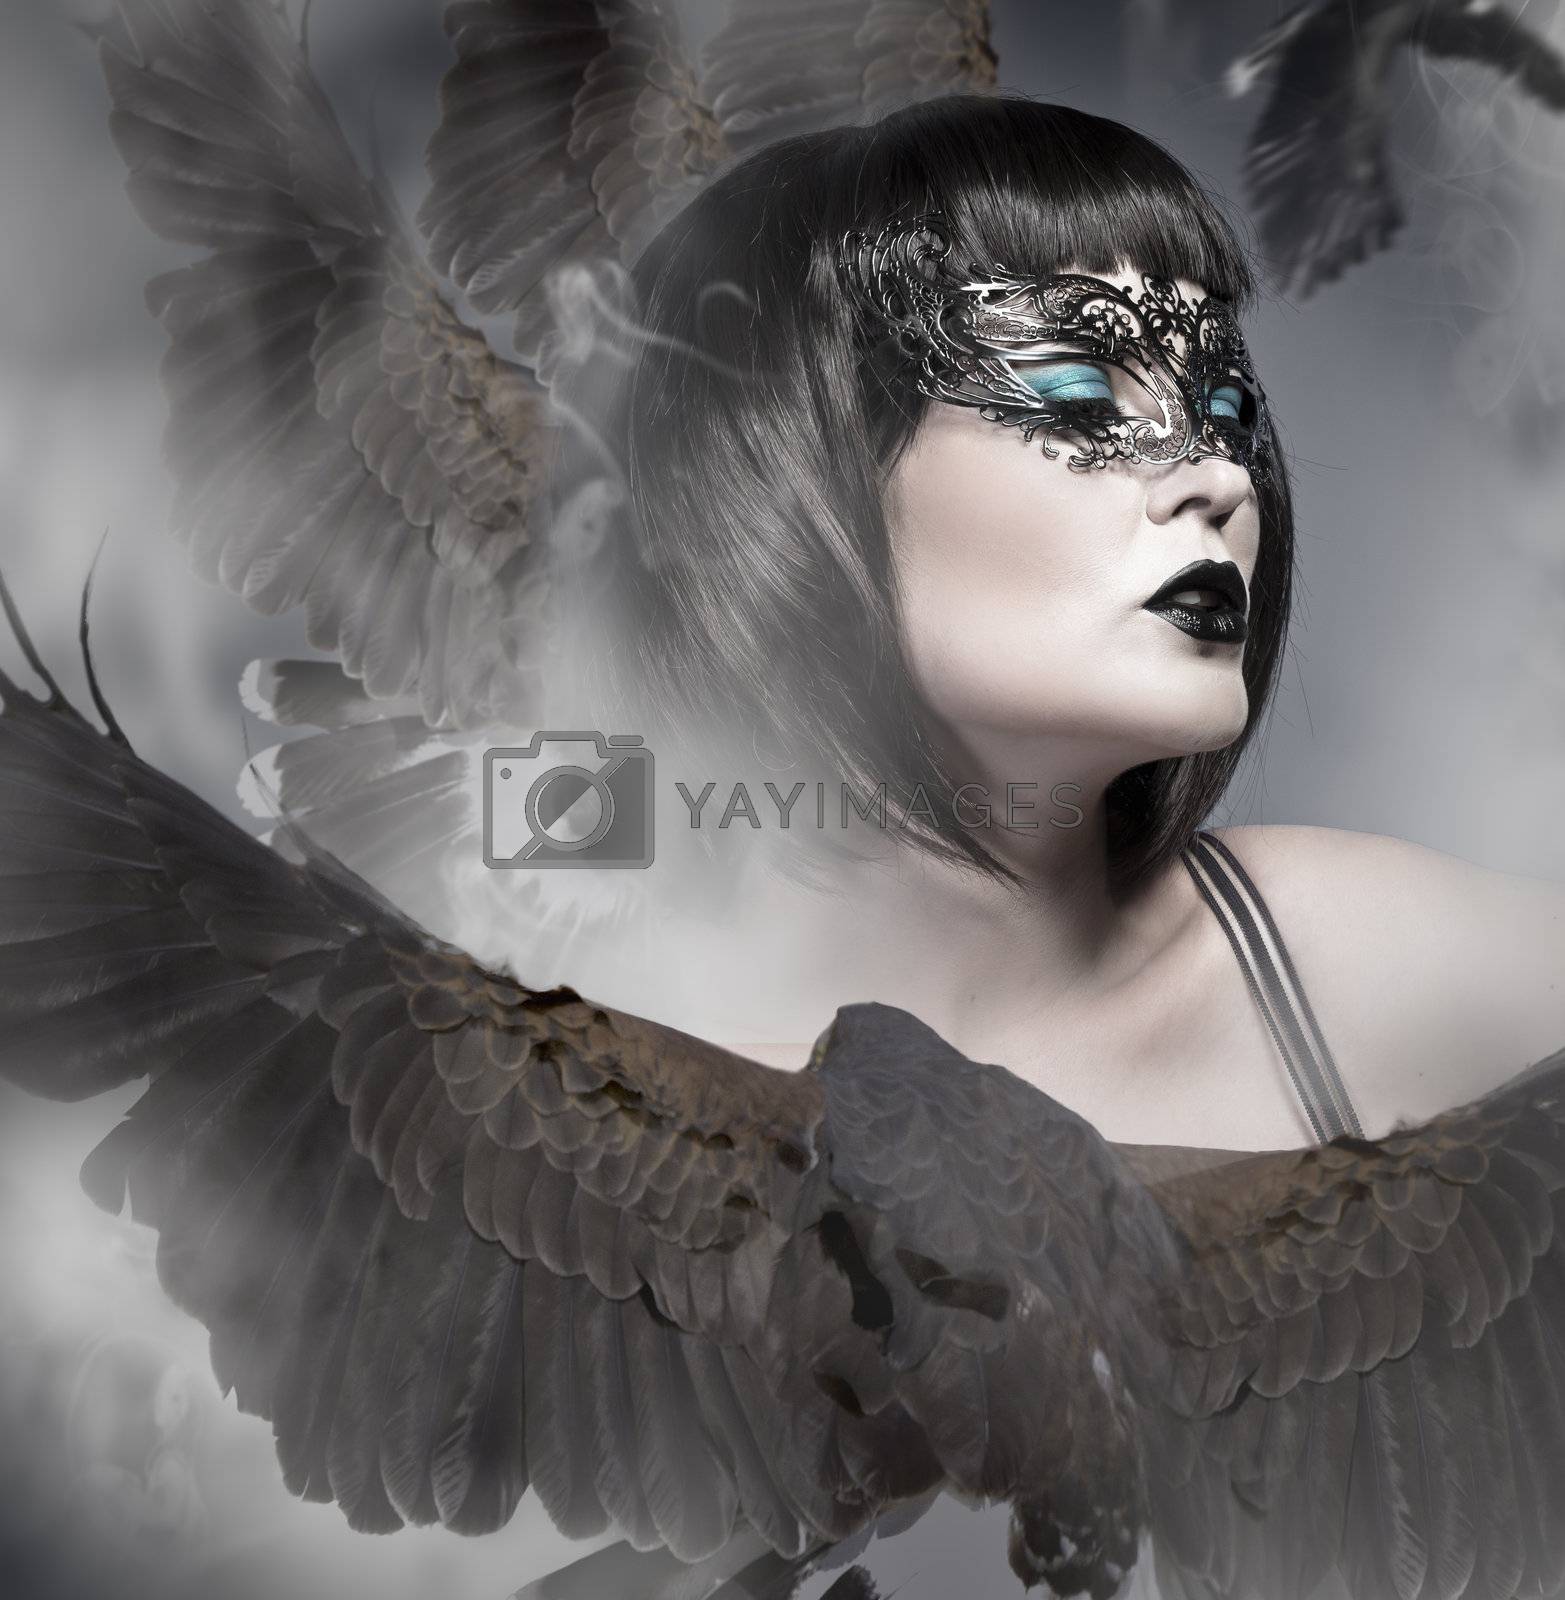 Royalty free image of Portrait of a beautiful woman wearing a venetian mask with big e by FernandoCortes